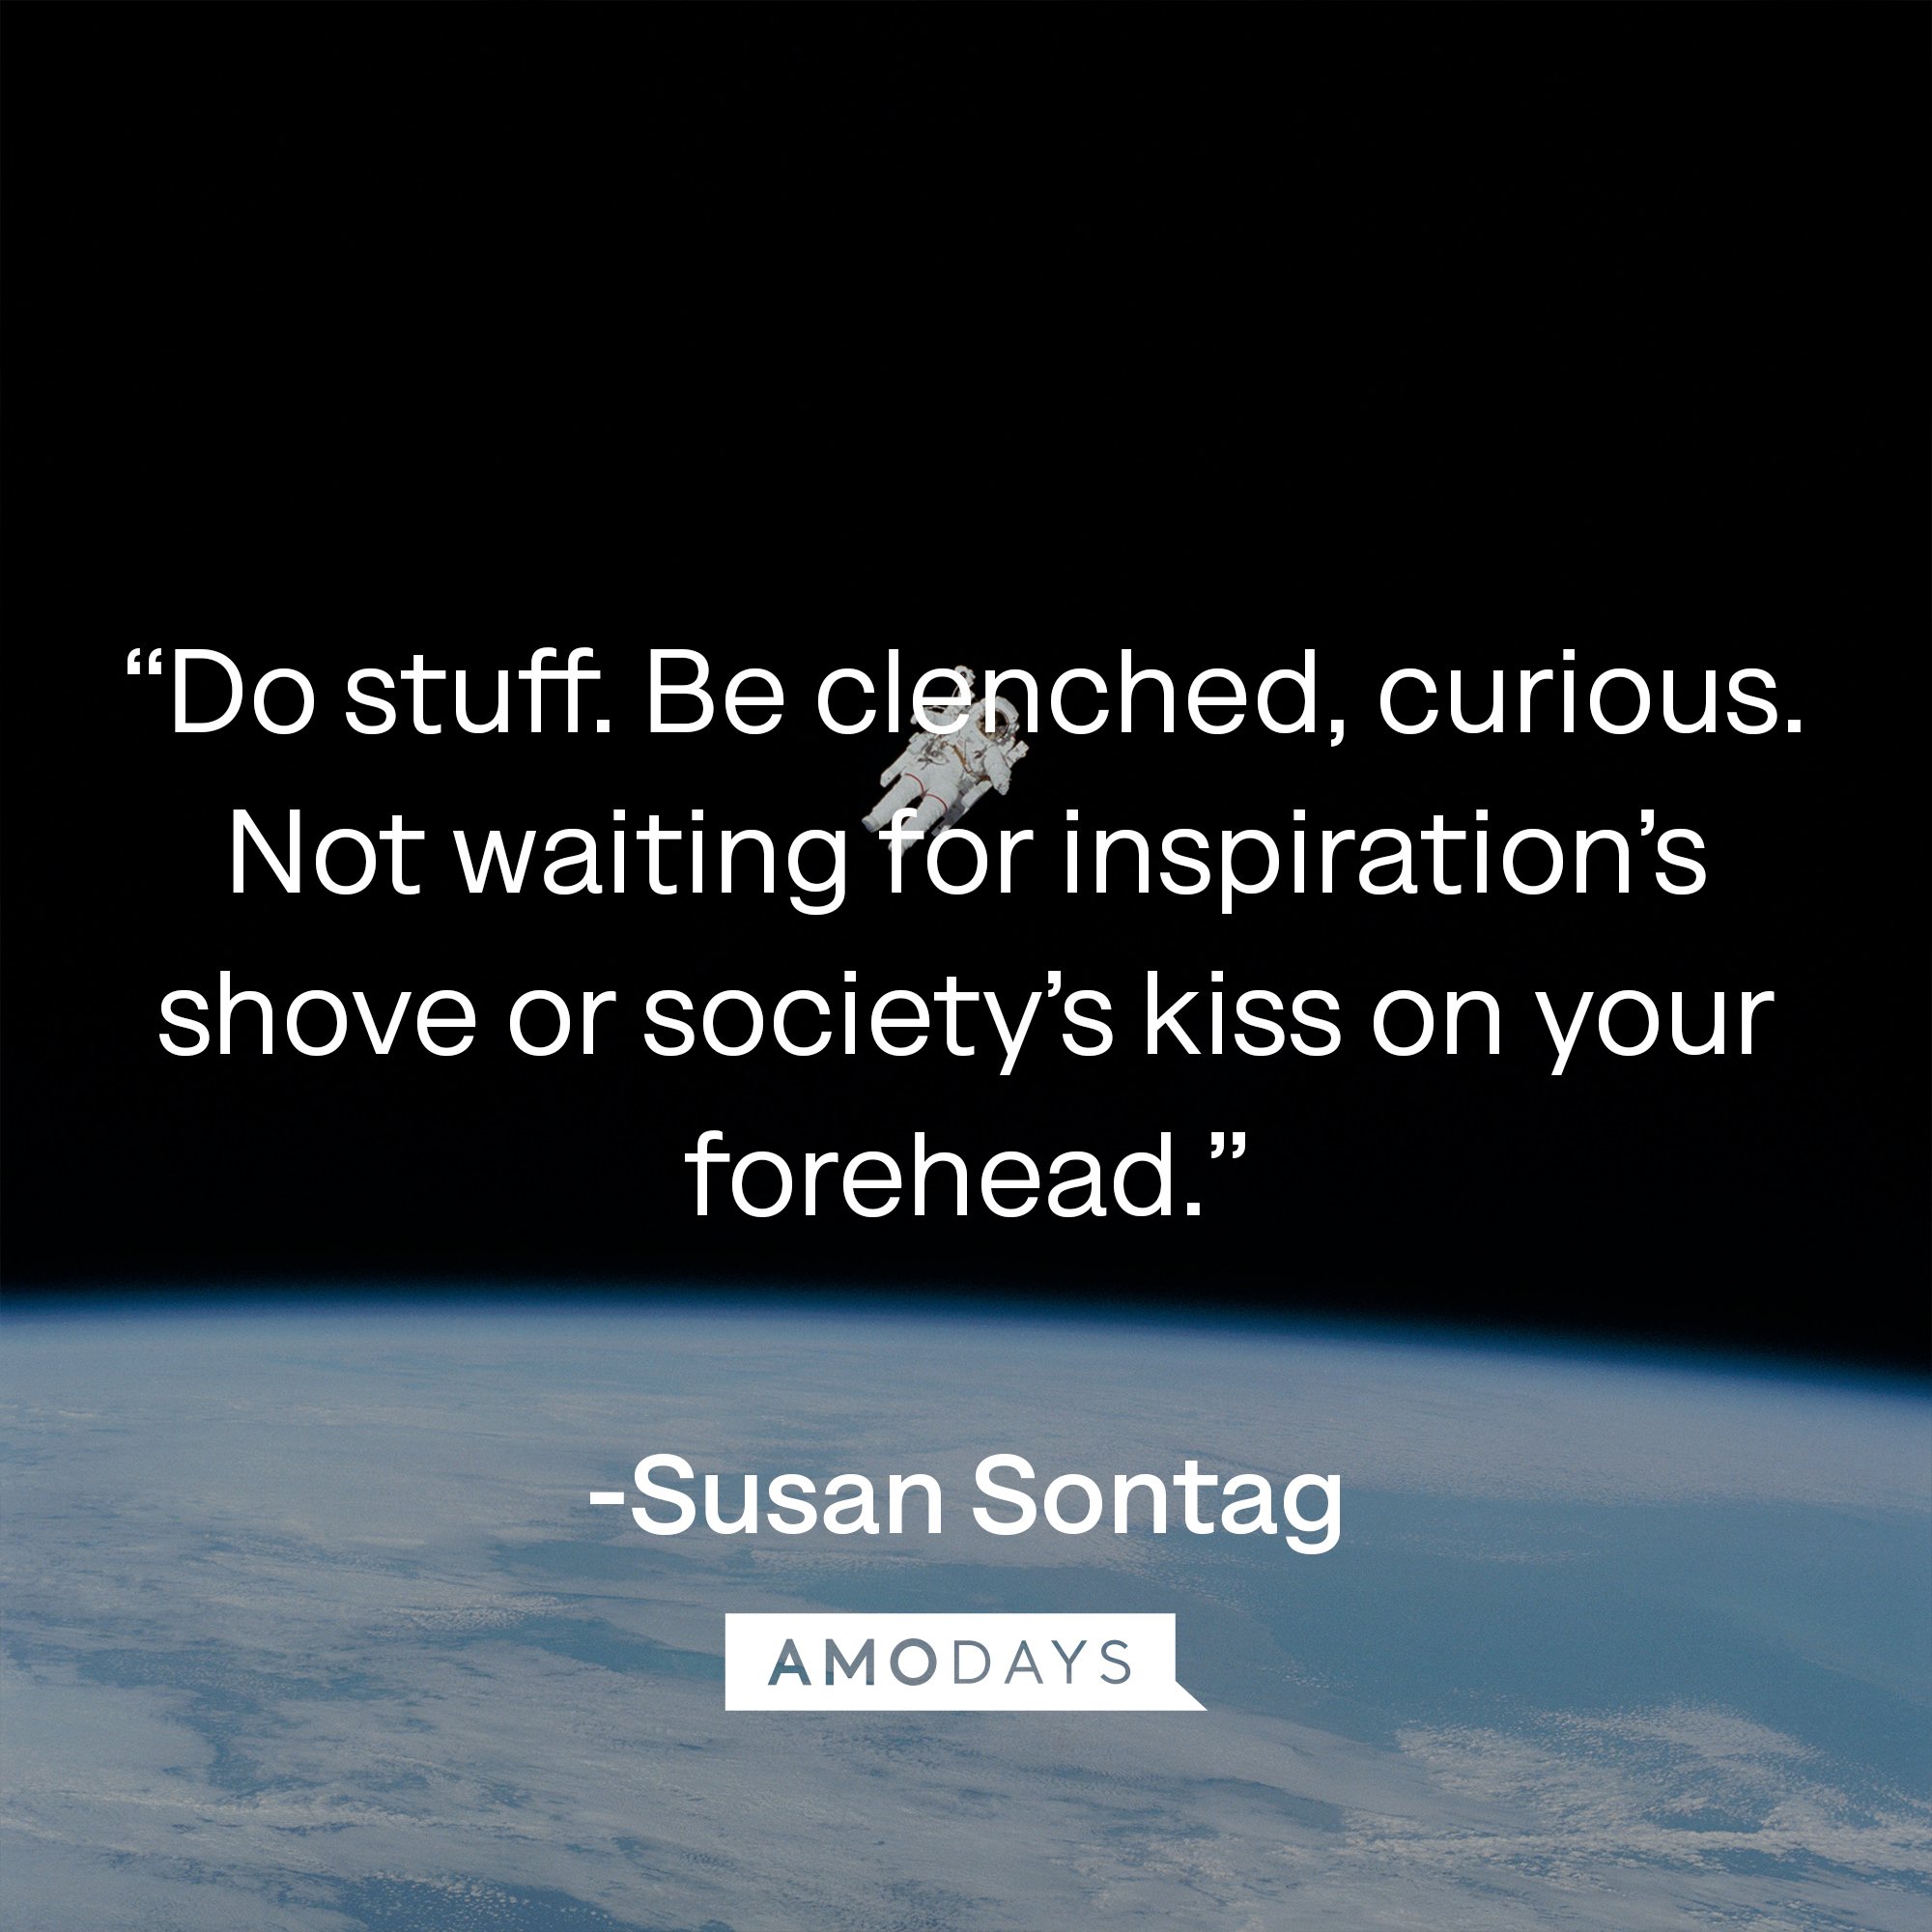 Susan Sontag's quote: “Do stuff. Be clenched, curious. Not waiting for inspiration’s shove or society’s kiss on your forehead.”| Image: AmoDays